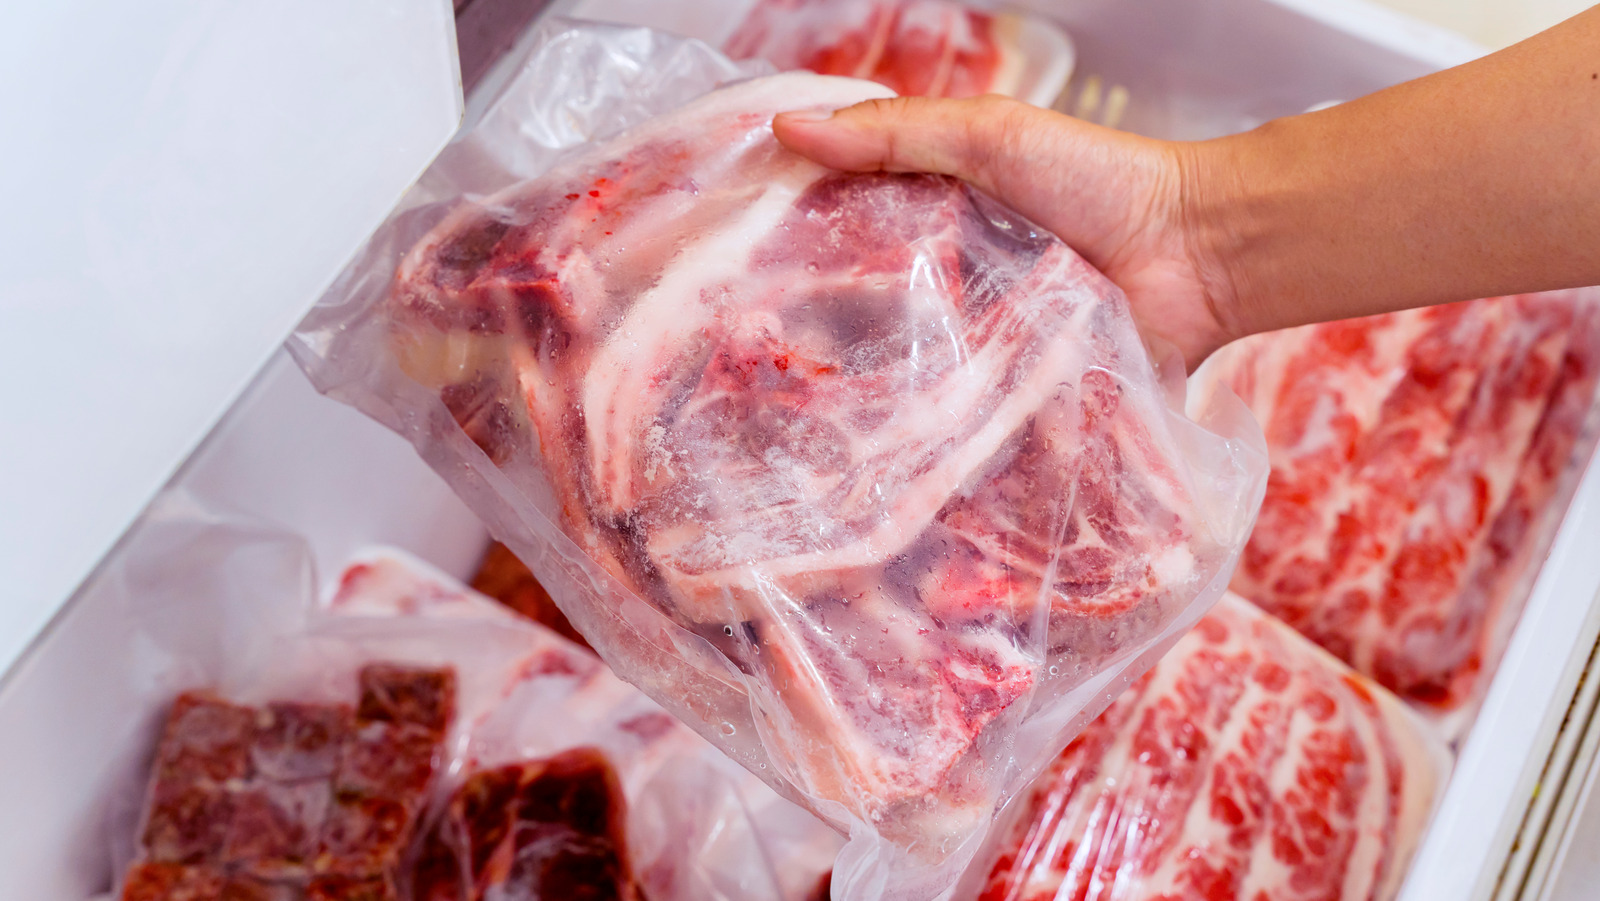 The Absolute Best And Worst Ways To Thaw Meat